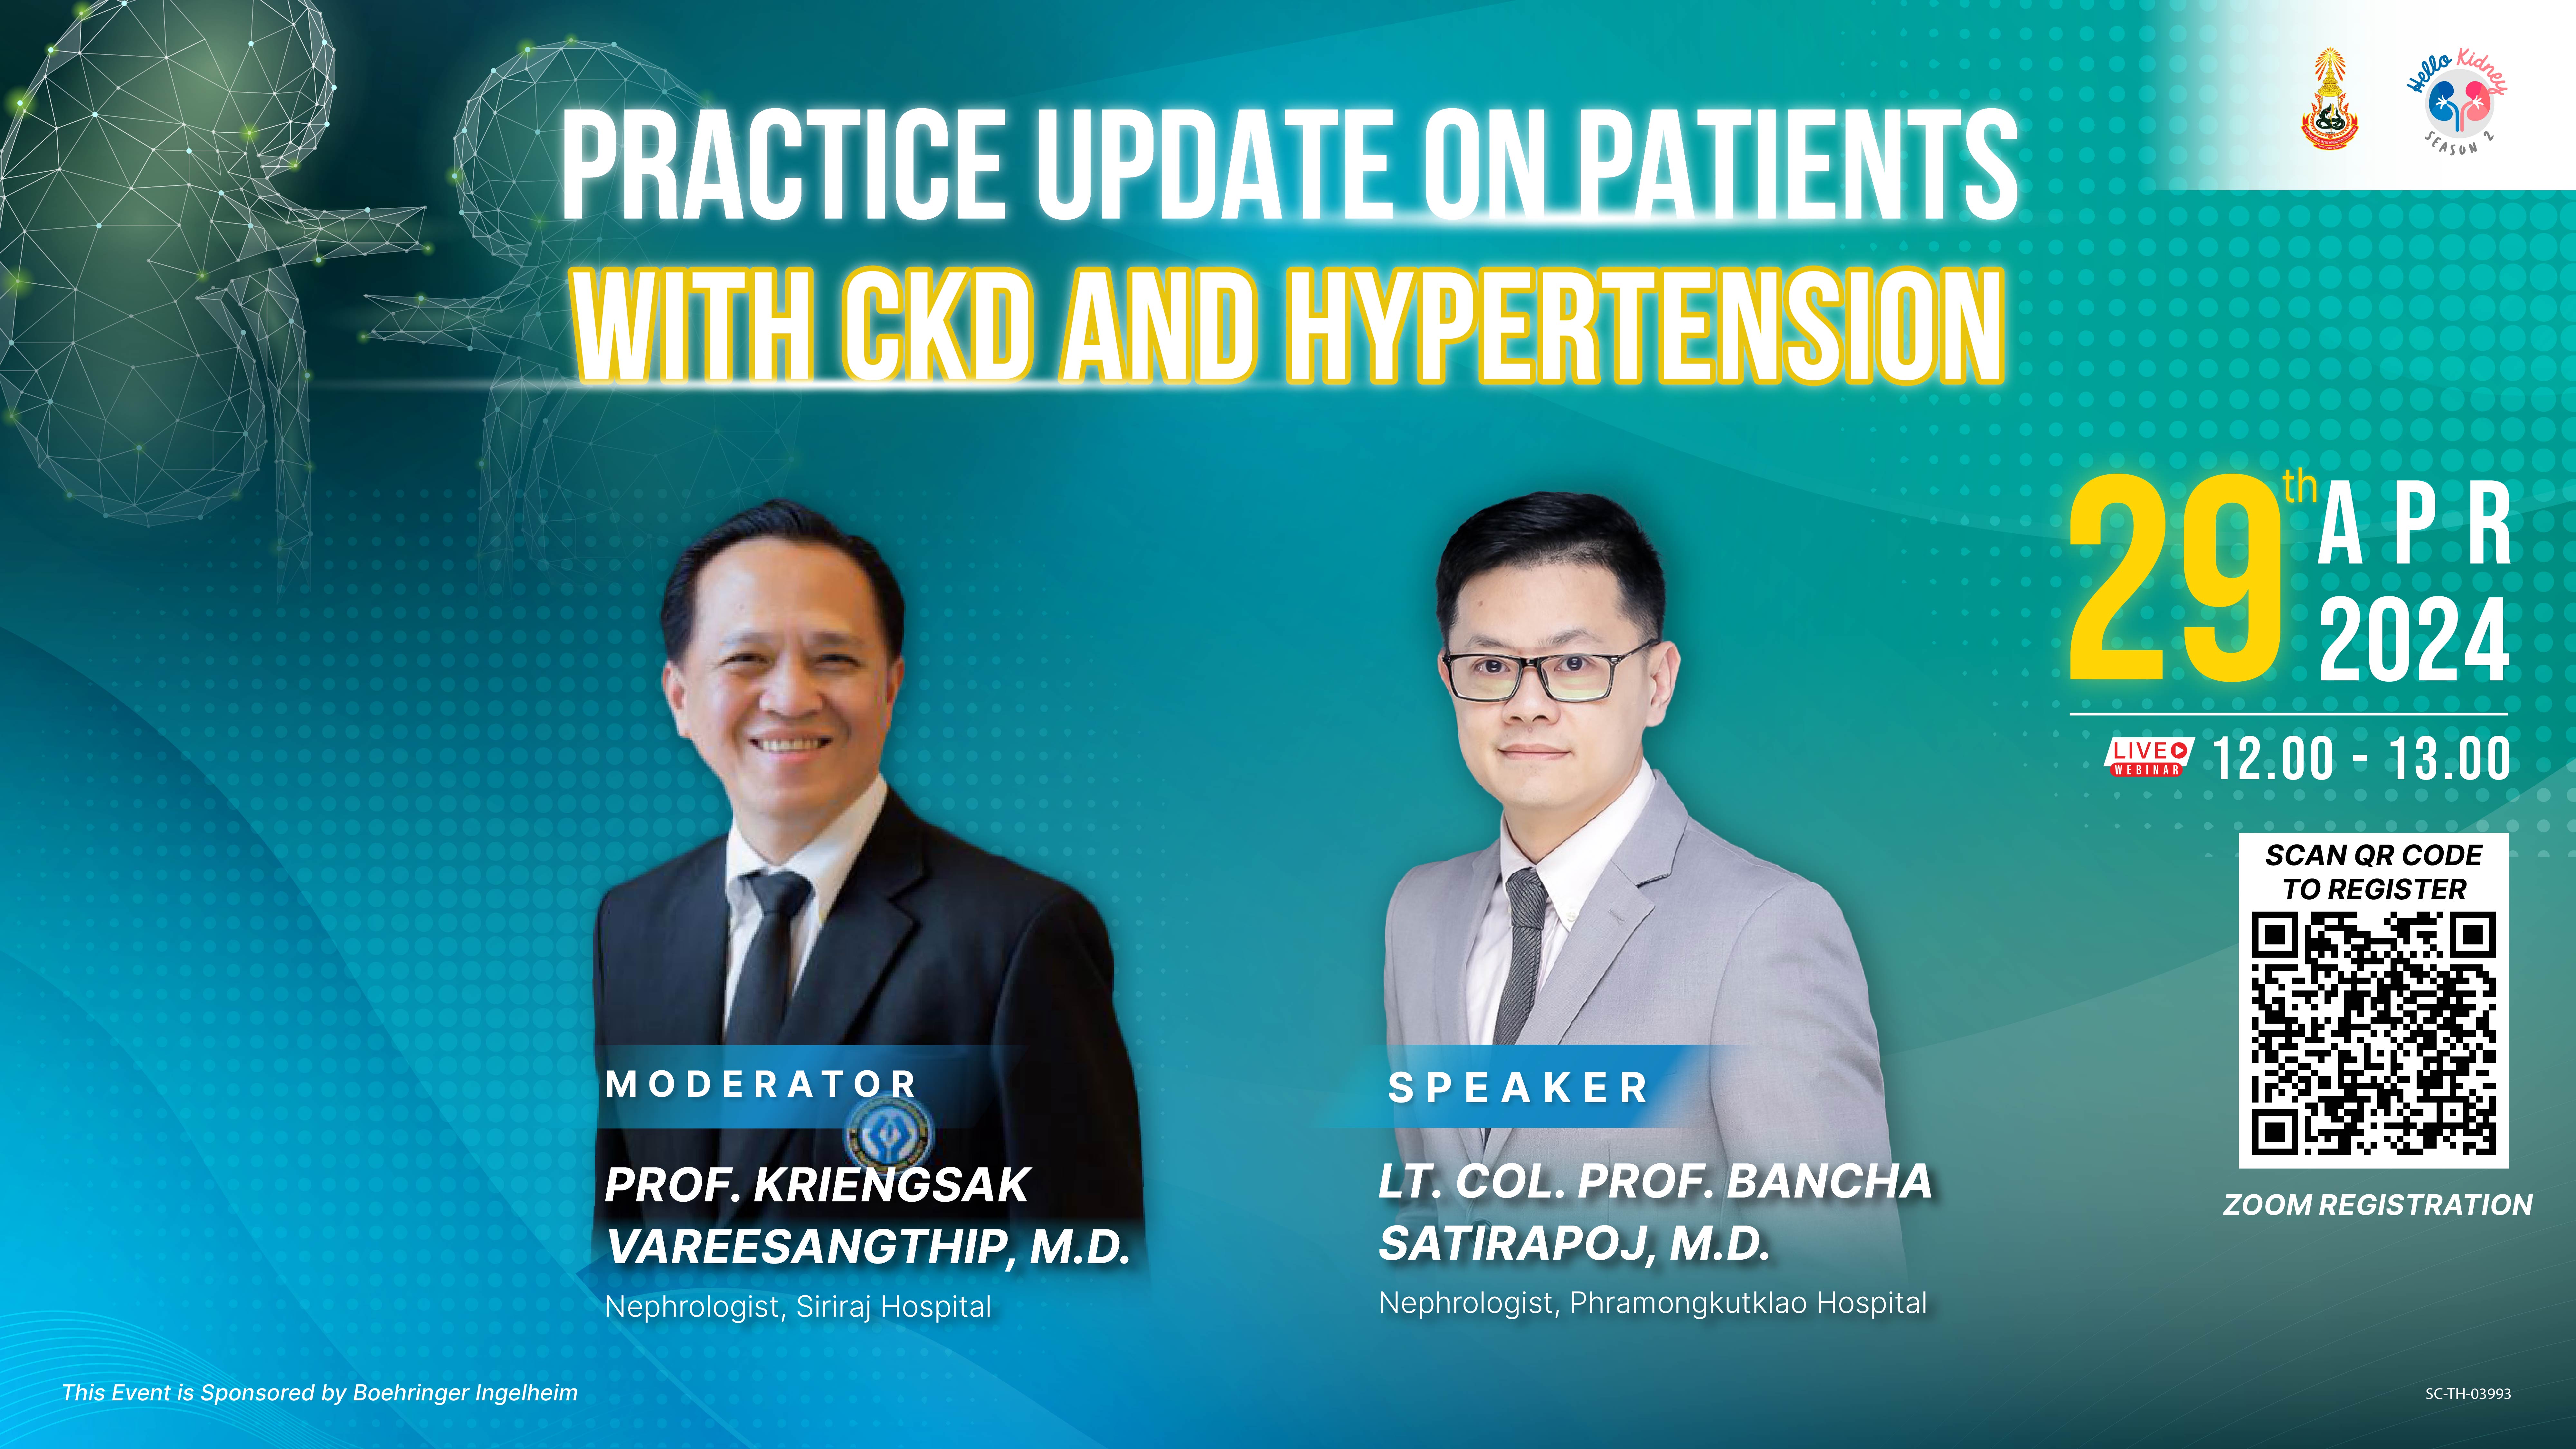 Practice Update on Patients with CKD and Hypertension